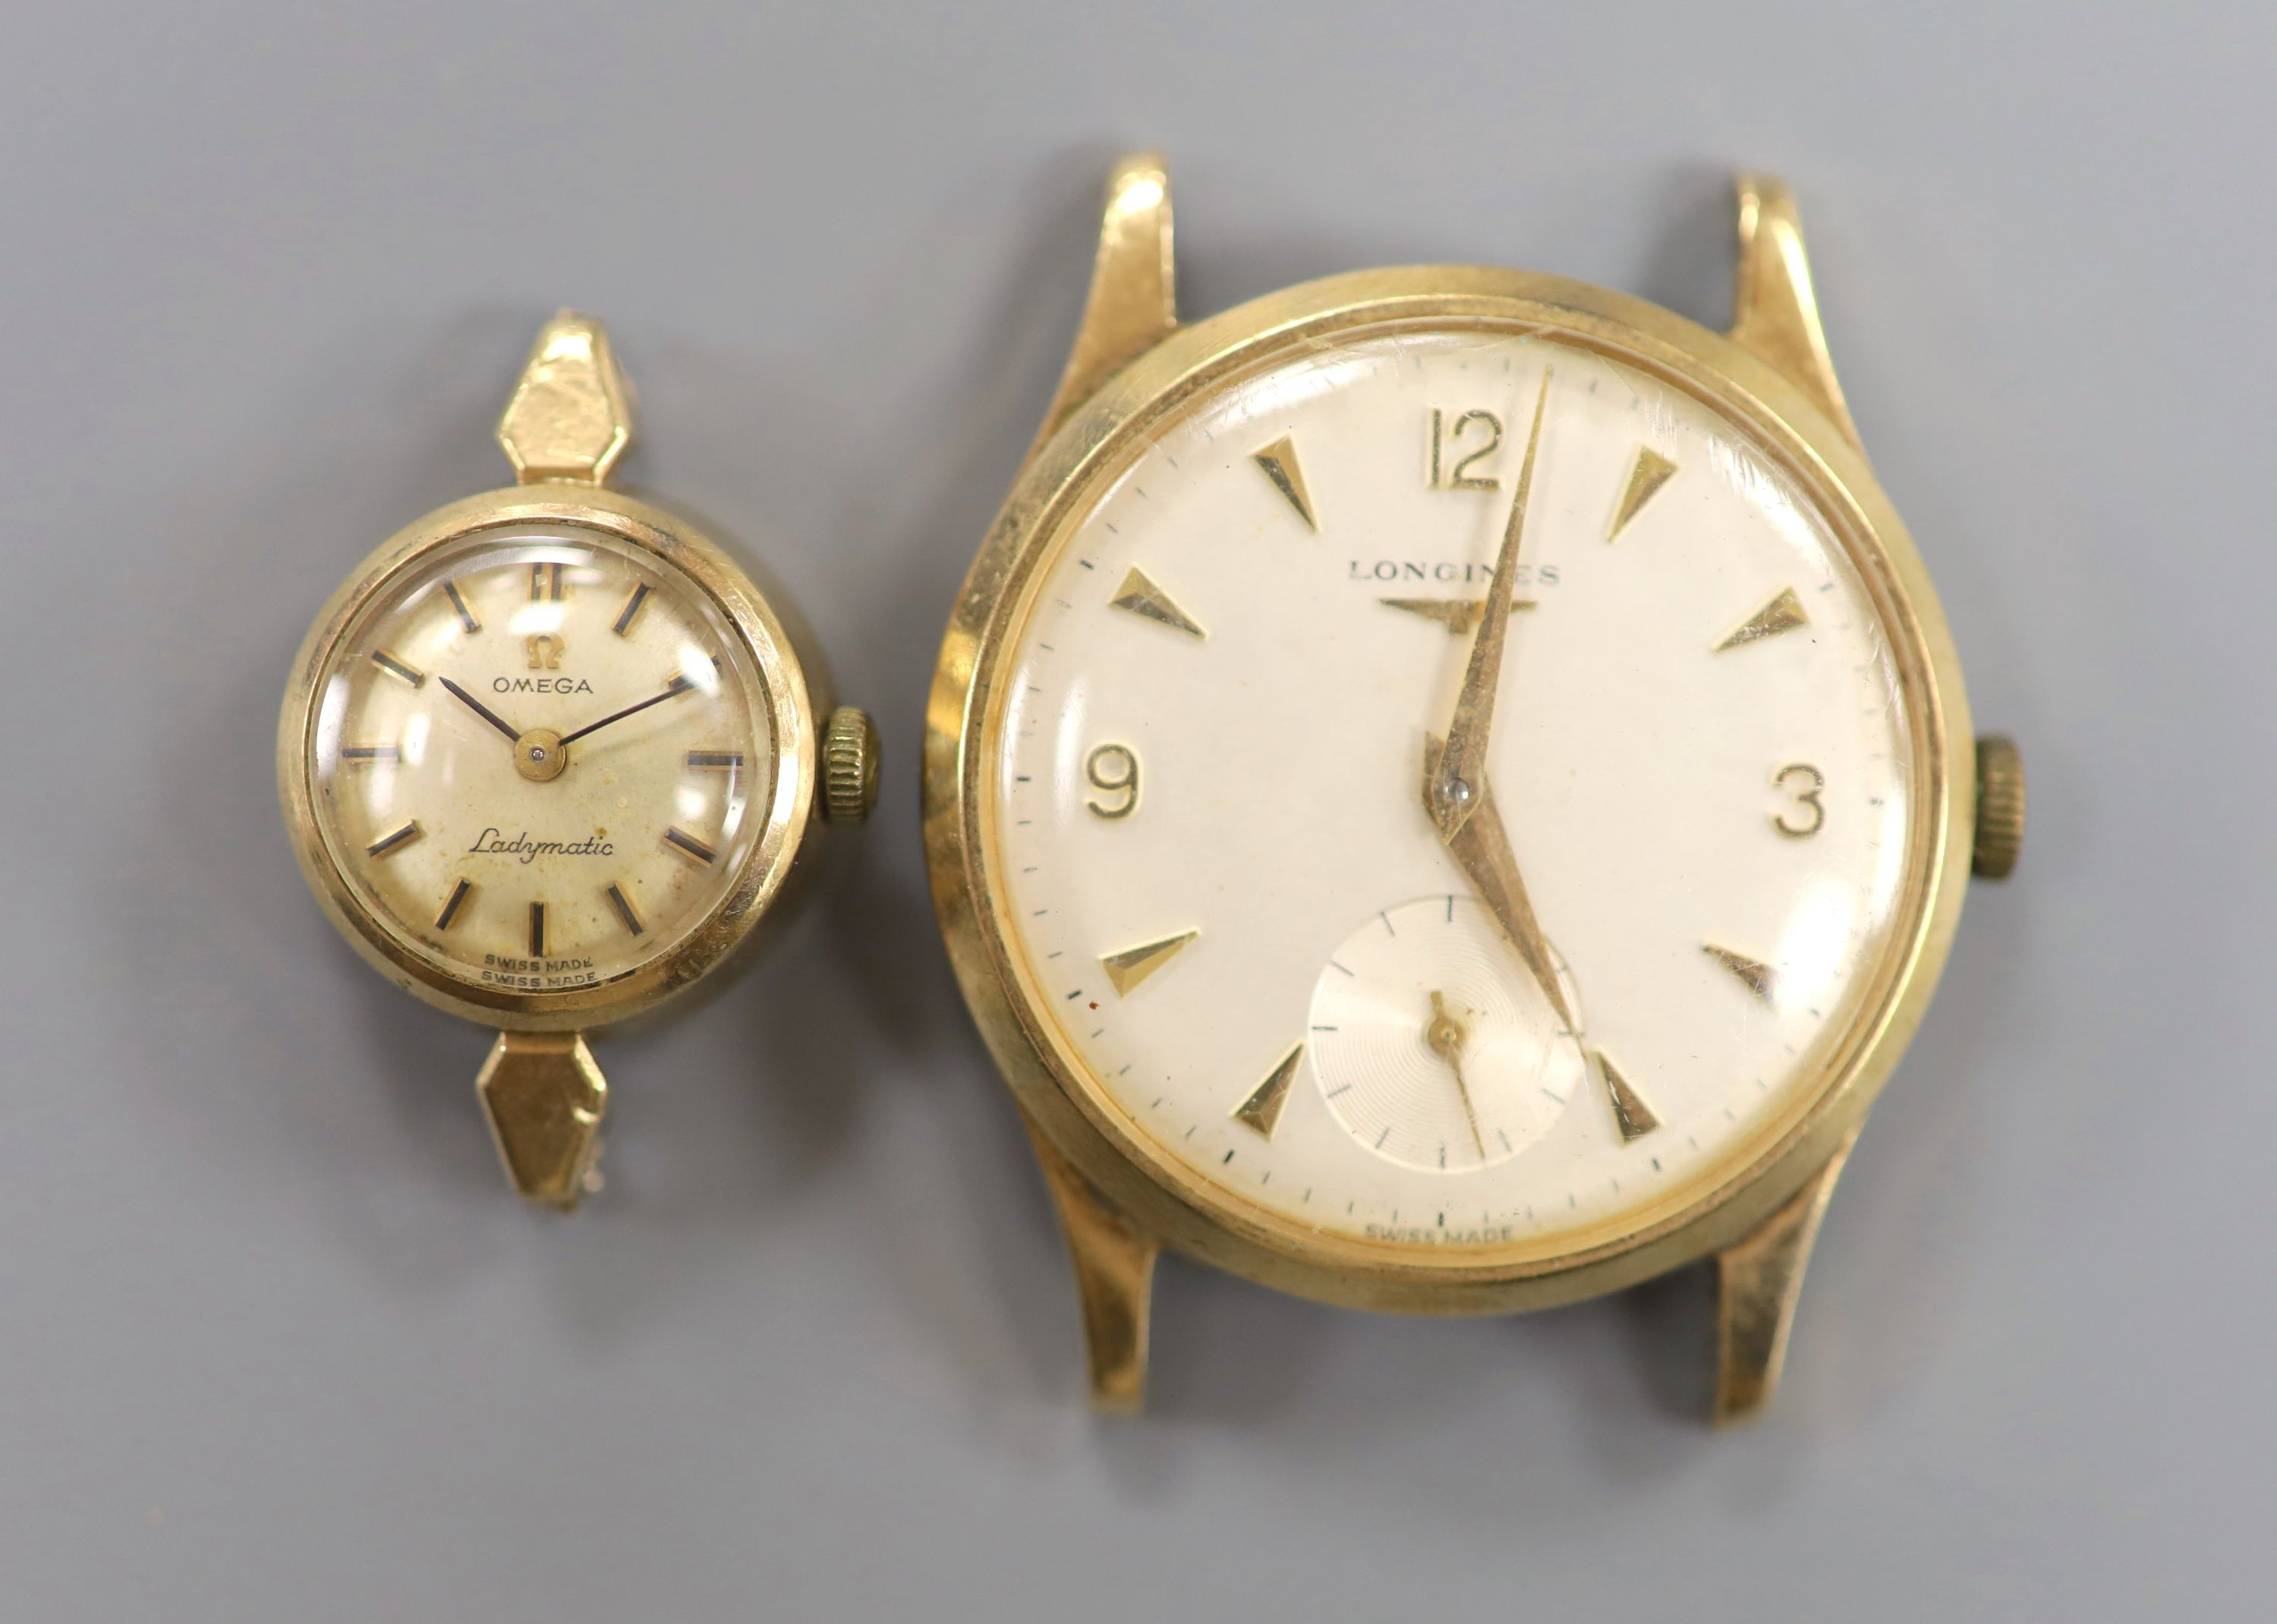 A gentleman's 9ct gold watch Longines manual wind wrist watch (no strap) and a lady's yellow metal Omega Ladymatic wrist watch (no strap), gross weight 39.5 grams.